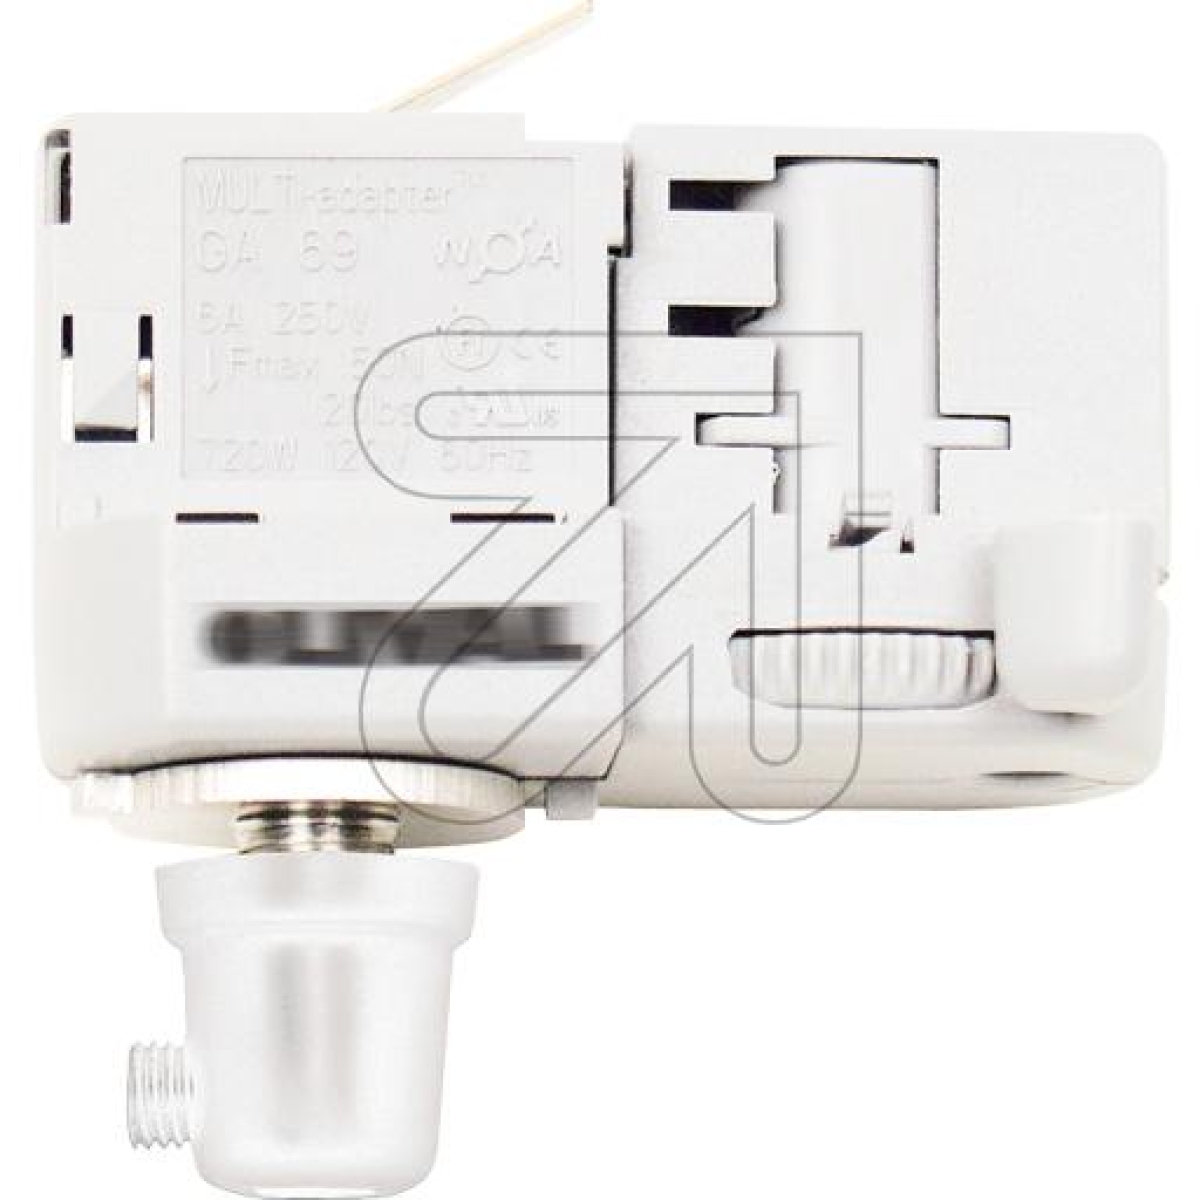 Licht 2000Euro adapter for 3-phase rail white 60104 (7601)Article-No: 609630